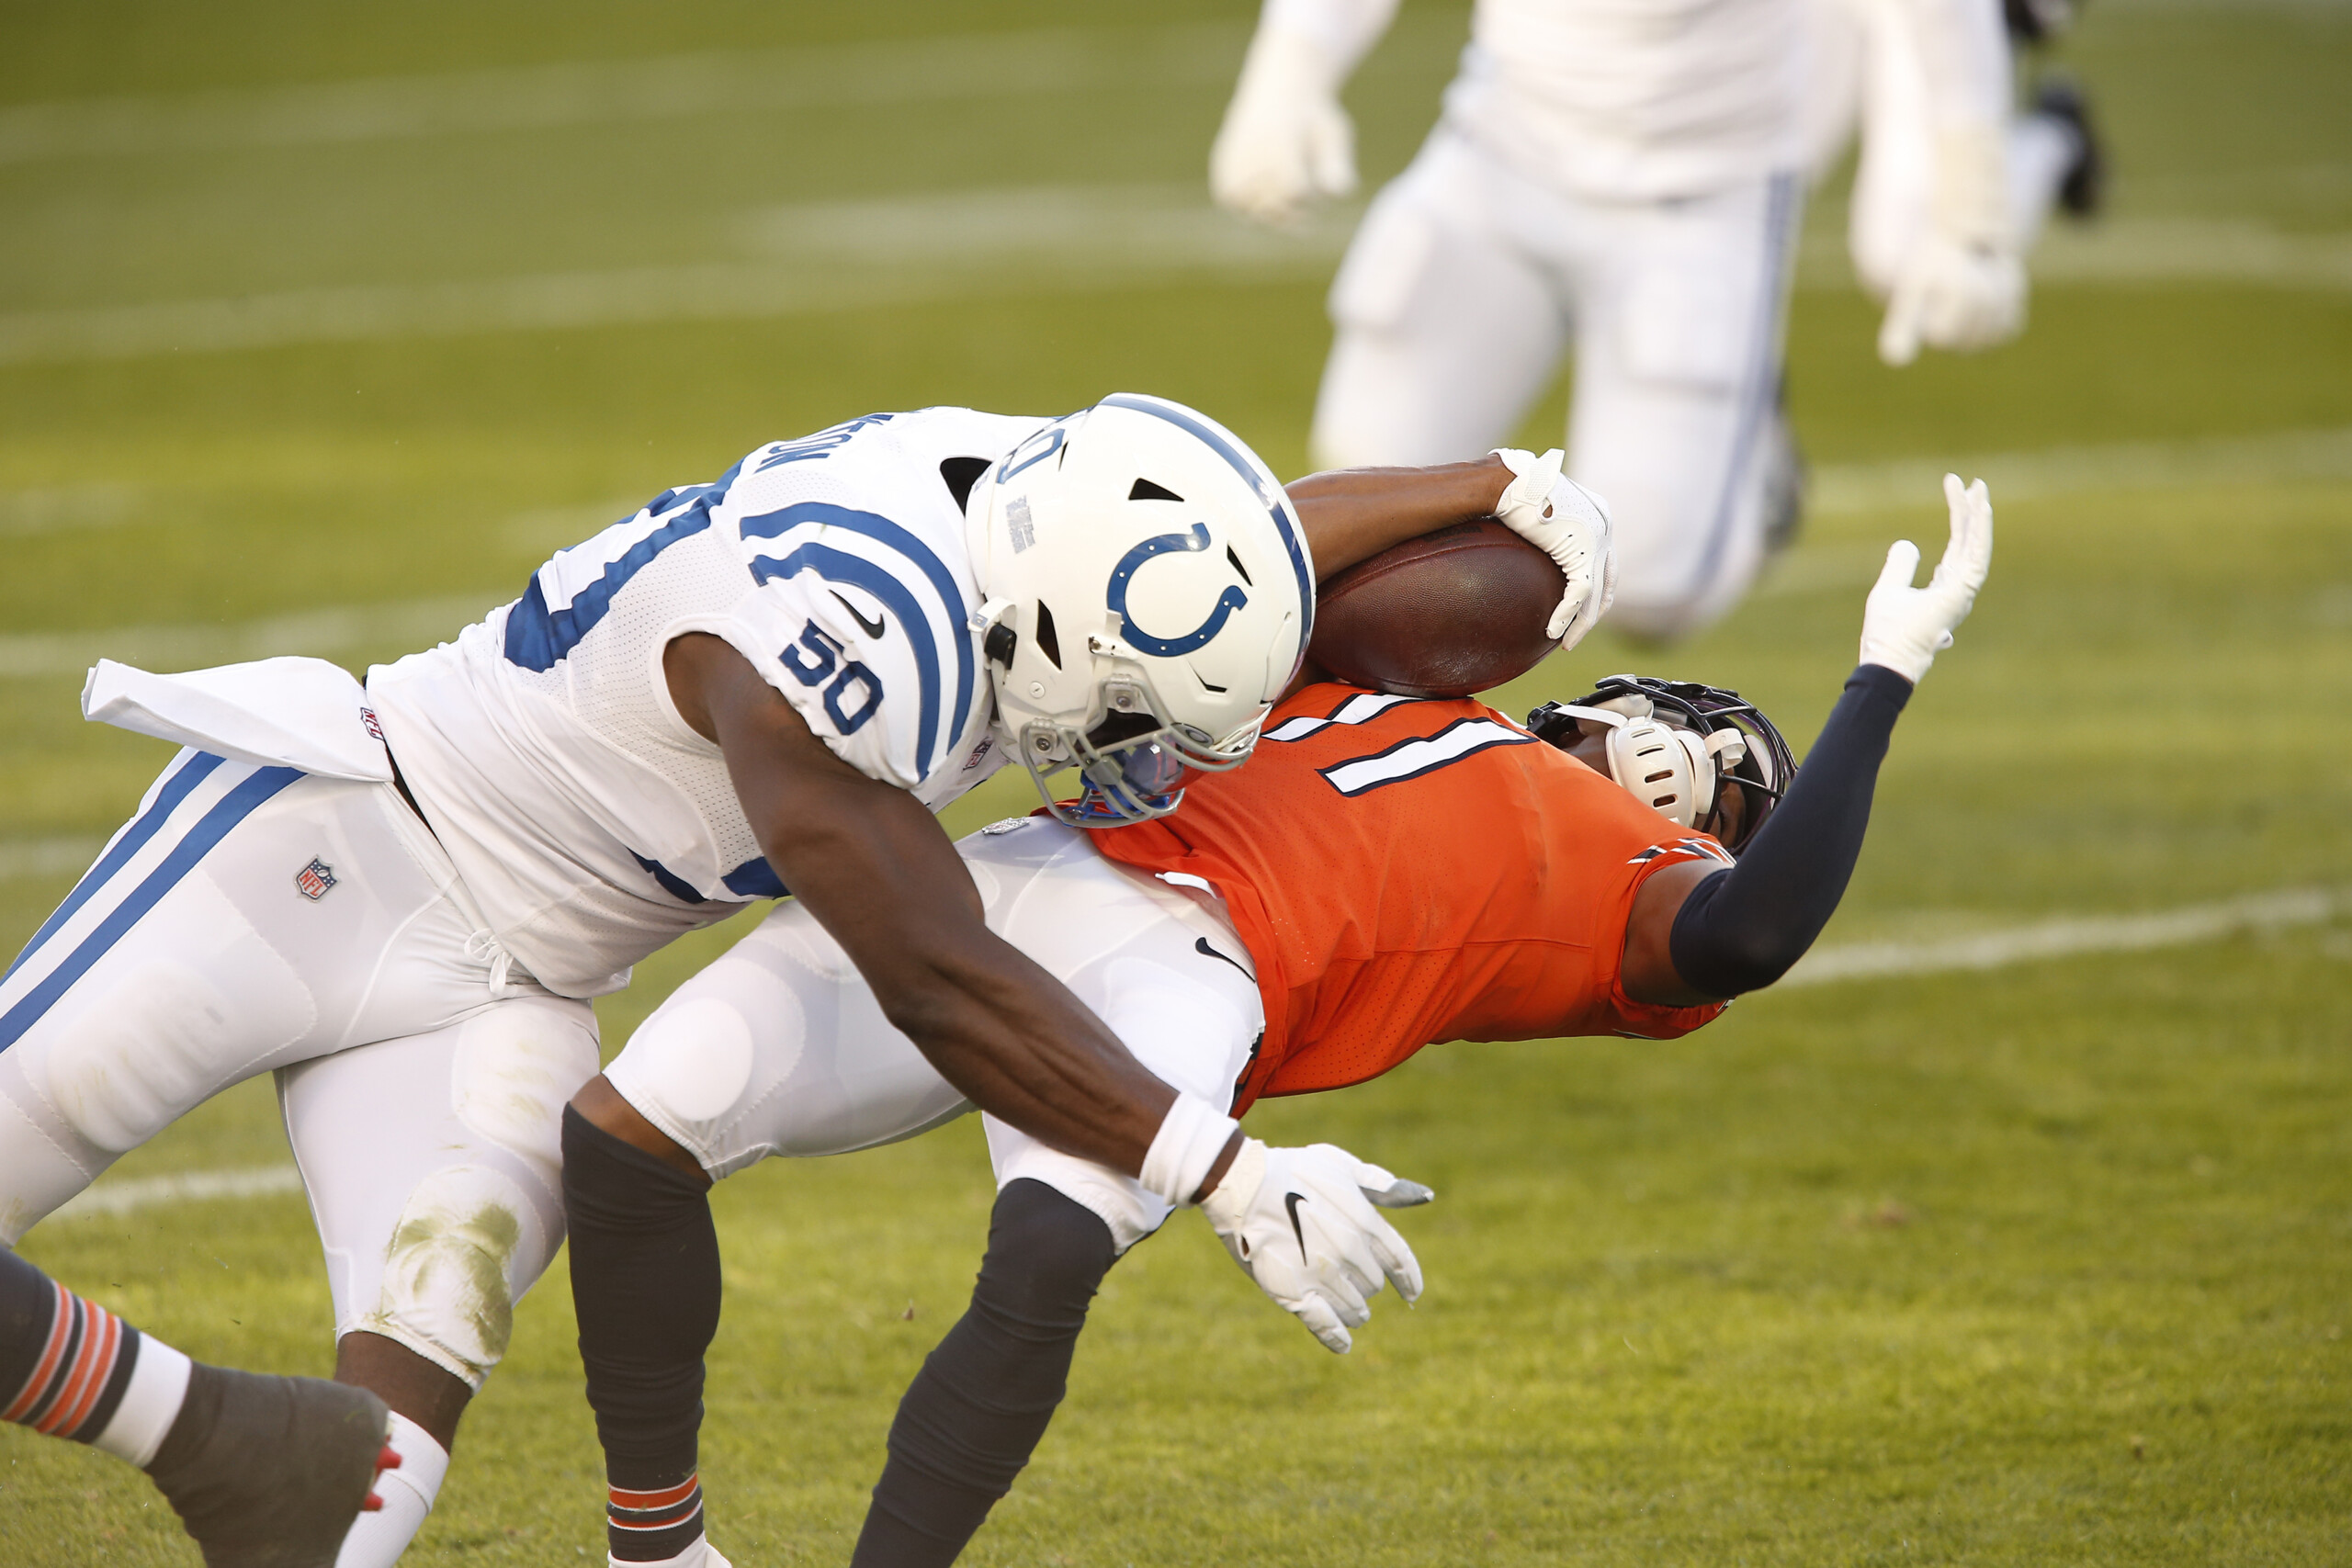 Colts defeat Bears 19-11 - WISH-TV, Indianapolis News, Indiana Weather